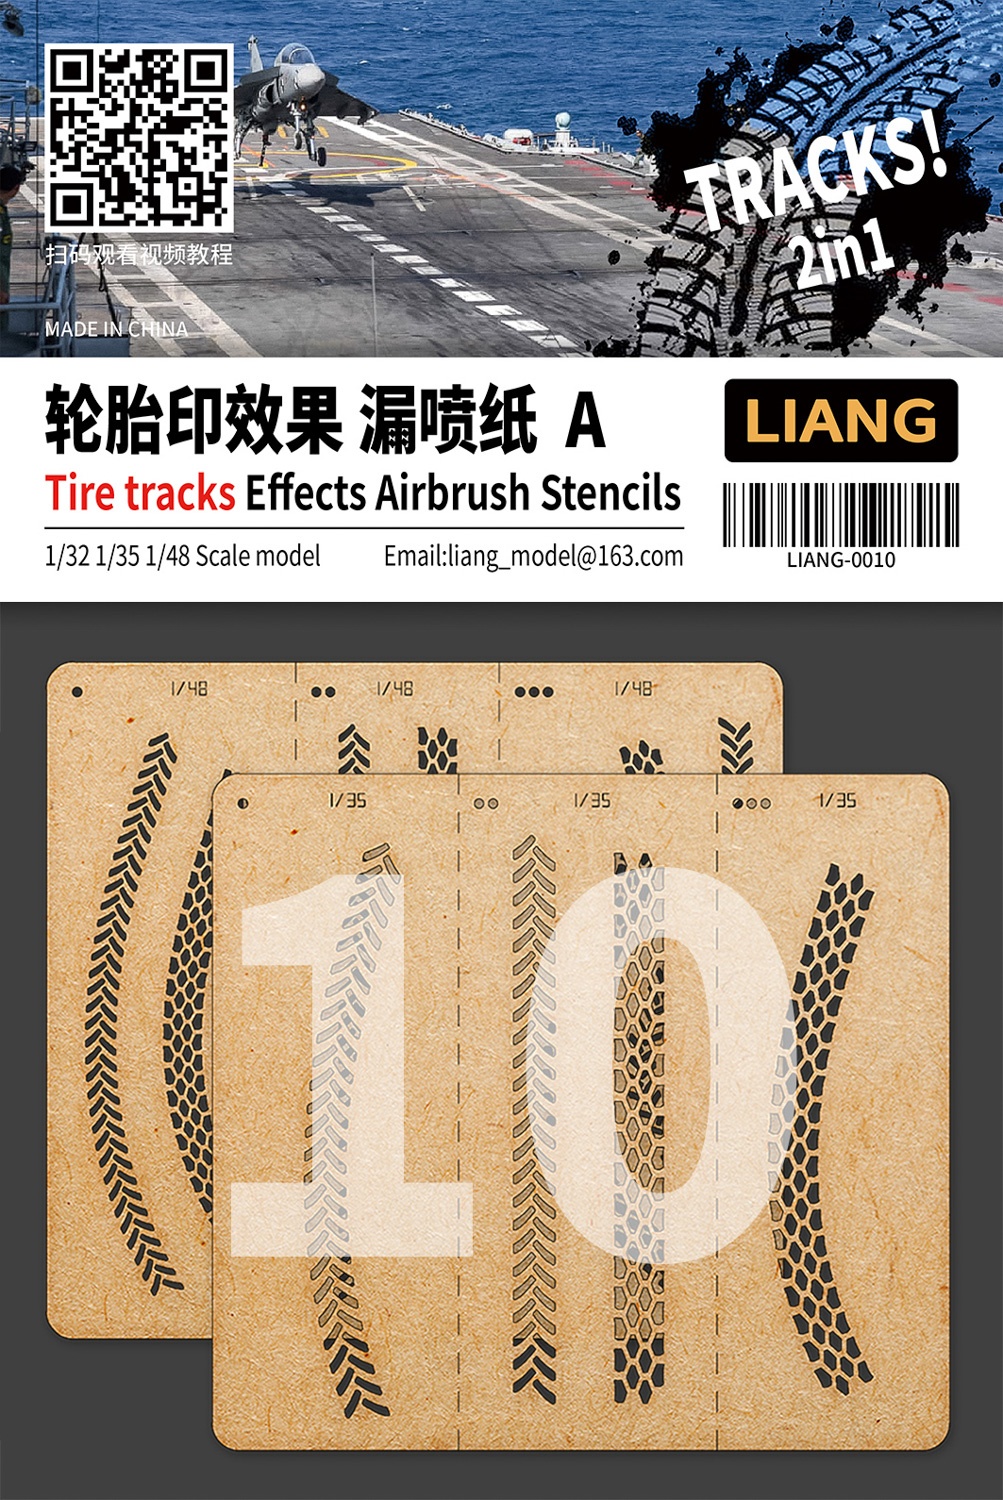 Details about   LIANG 0010+0011 Tire tracks Effects Airbrush Stencils 1/32 1/35 1/48 Scale model 